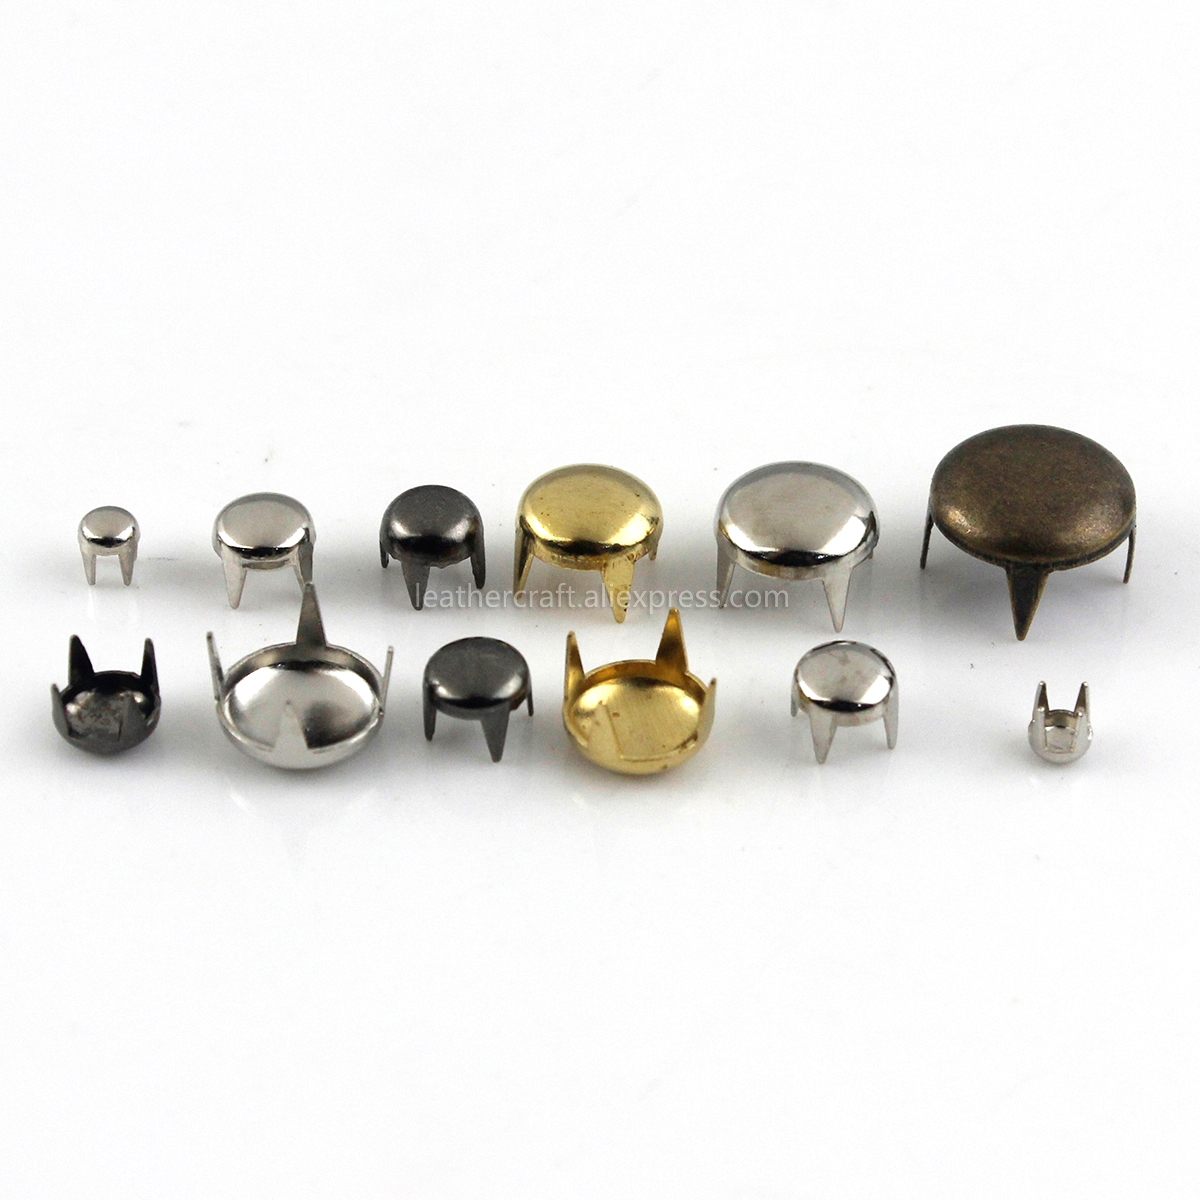 100sets 2-6mm Metal Round Cap Claw Rivets Studs Leather Craft Bag Belt Garment Shoes Collar Decor Accessories 13 Sizes